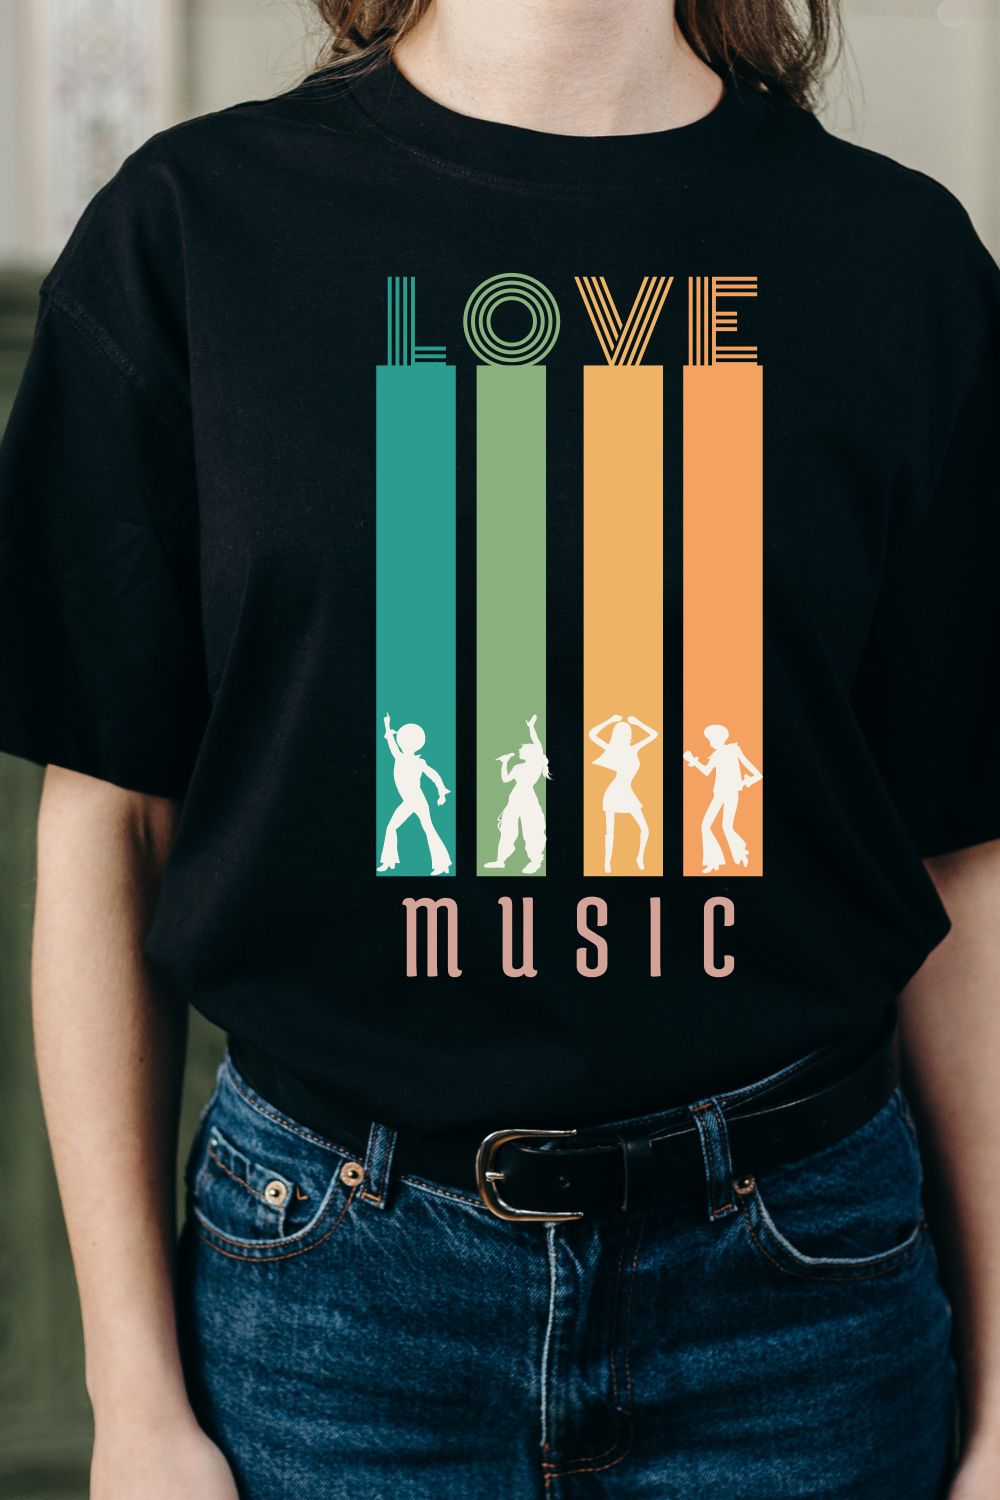 Love music pinterest preview image.